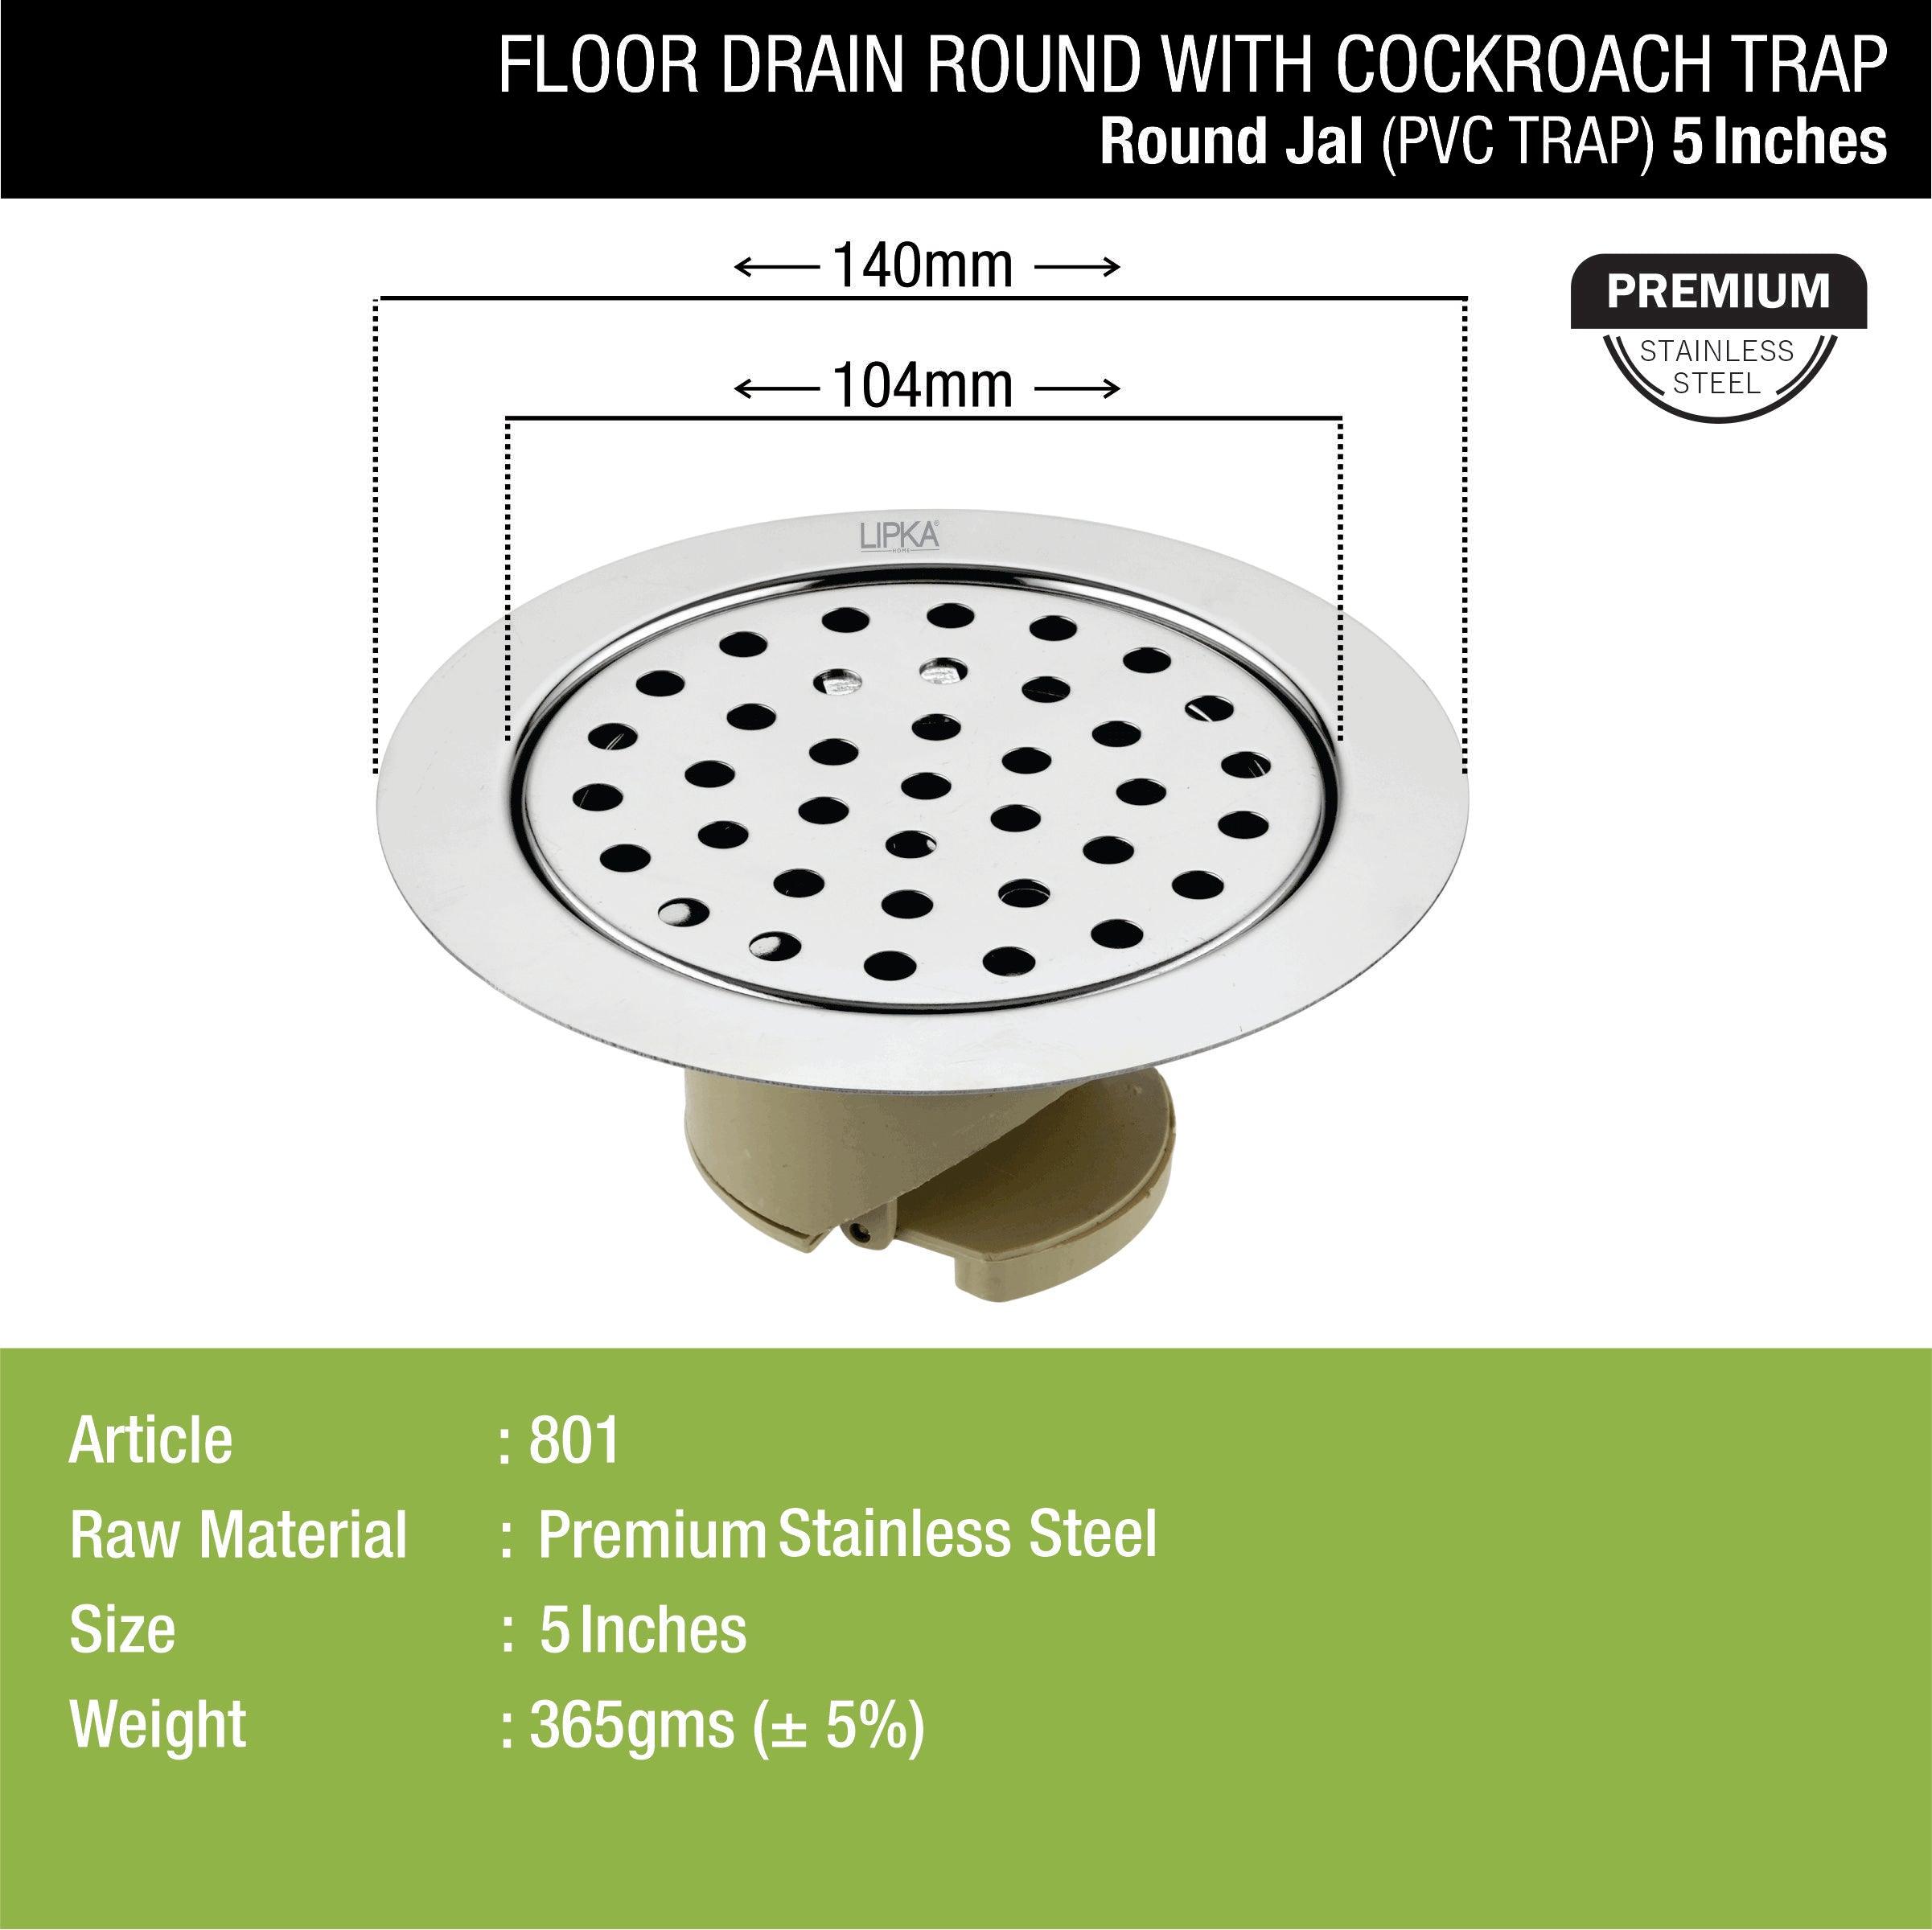 Round Jal Floor Drain (5 Inches) with Wide PVC Cockroach Trap dimensions and sizes